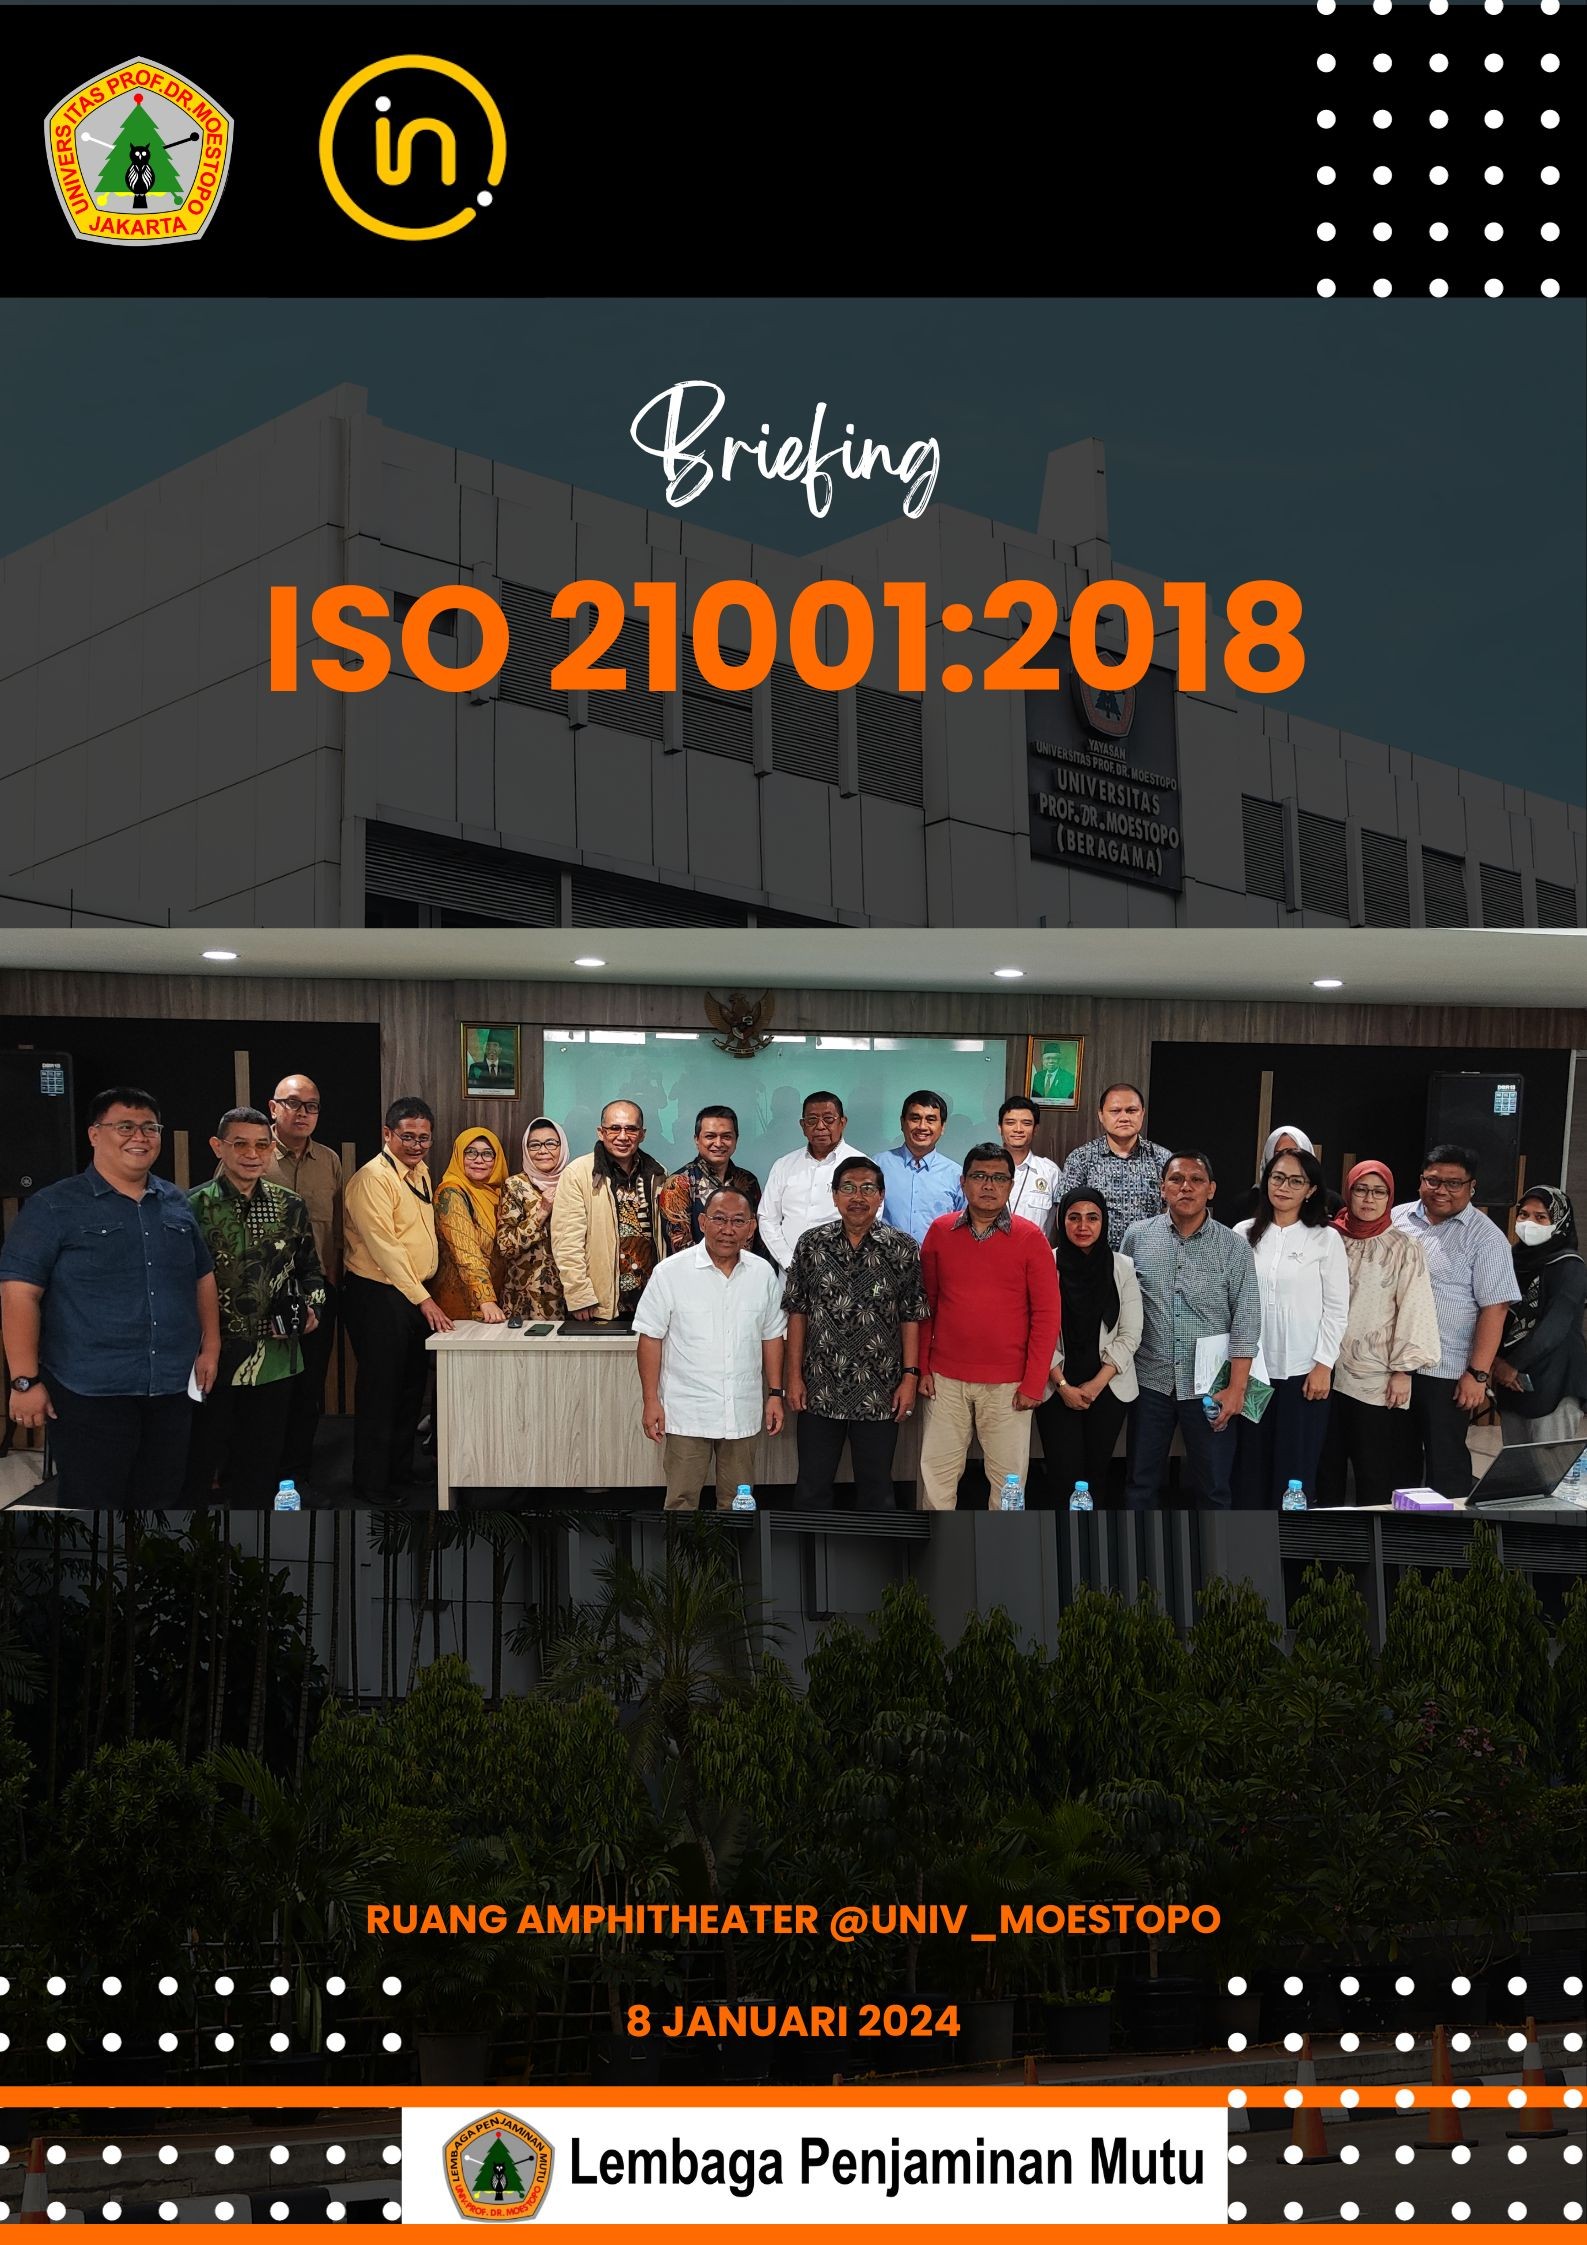 Briefing ISO 21001:2018